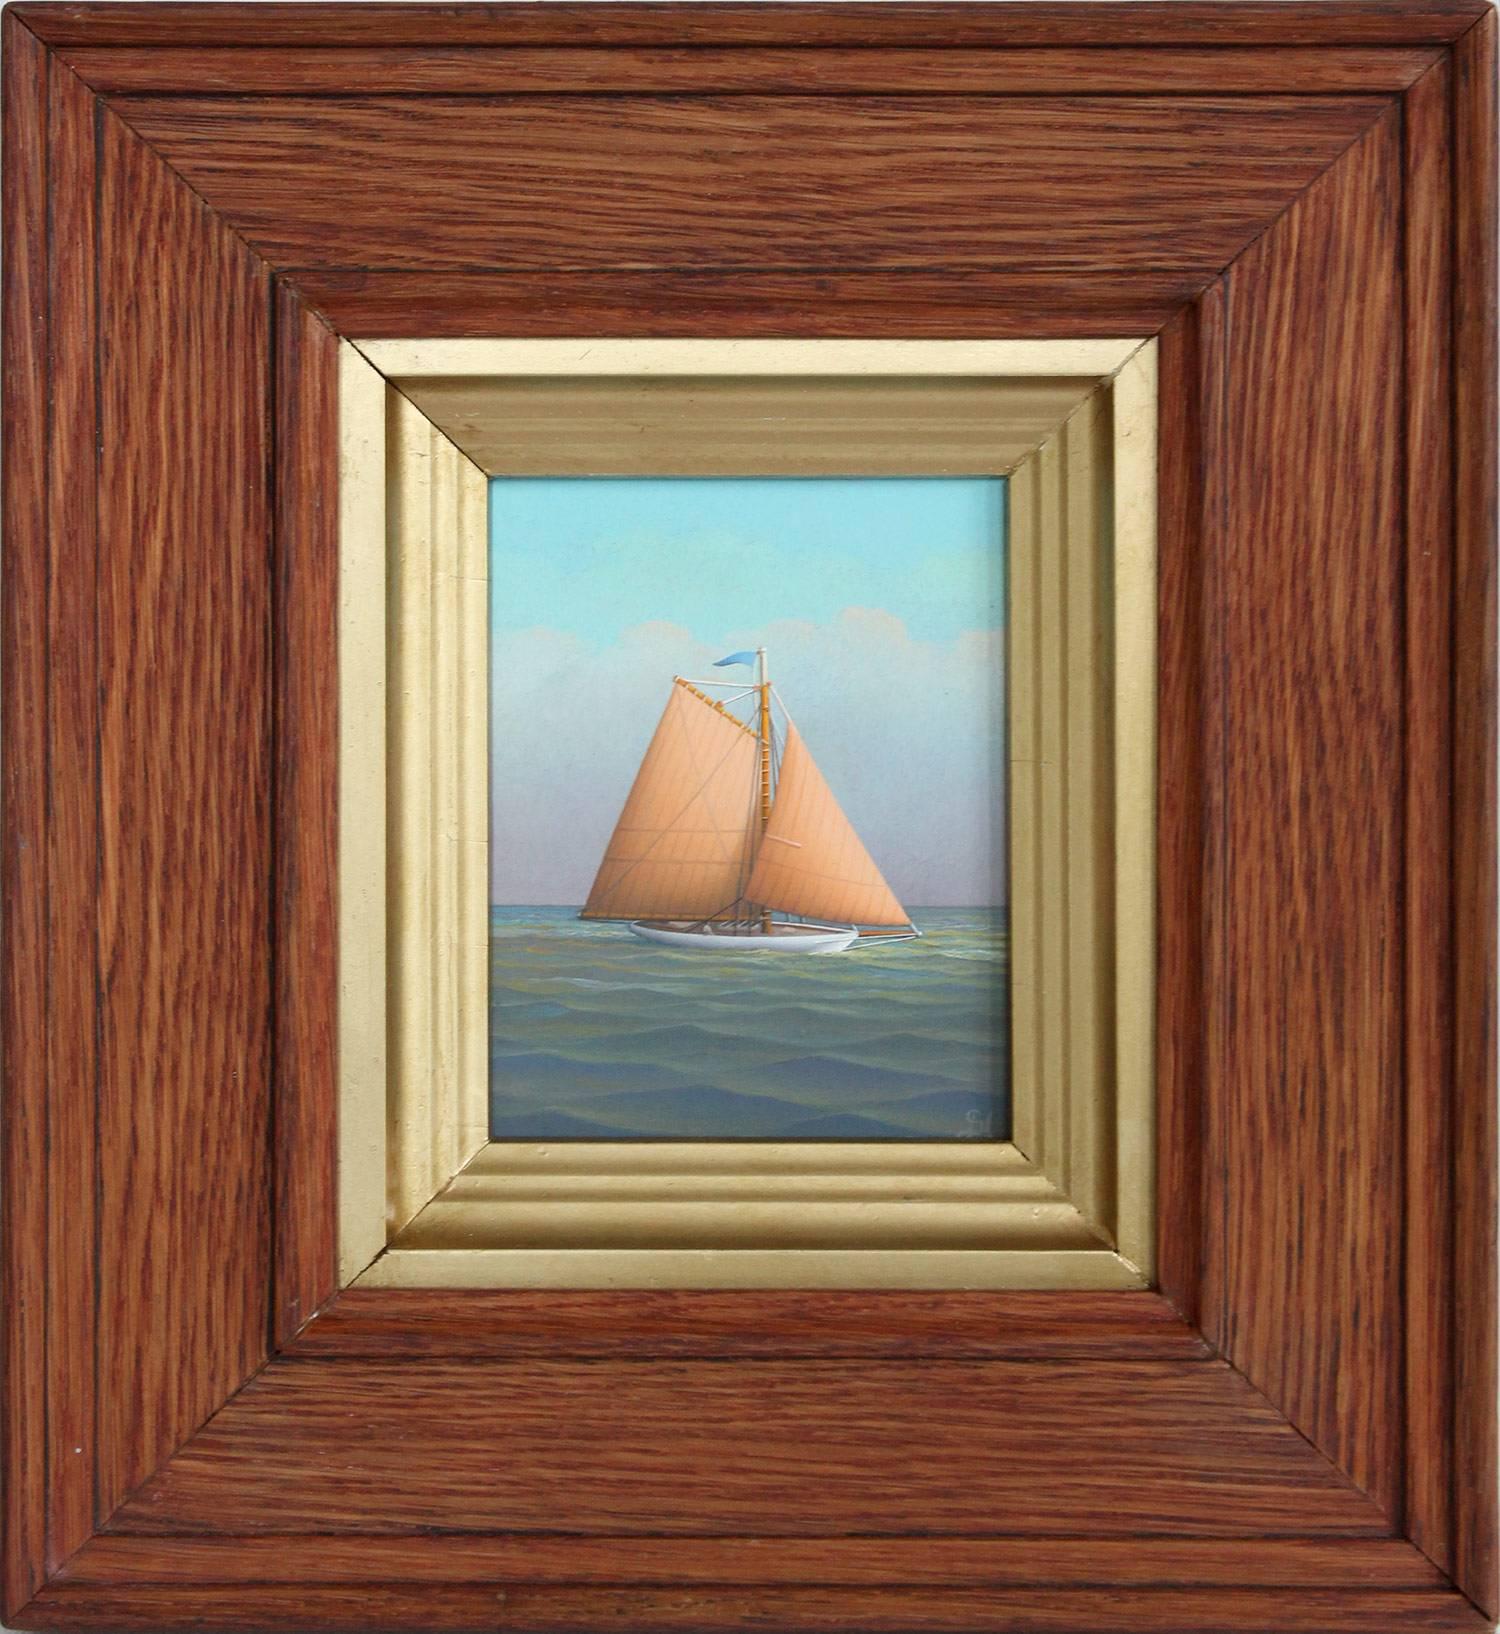 George Nemethy Figurative Painting - "Sailing on the Caribbean" Realist Oil Painting on Board of Sailboat in Open Sea